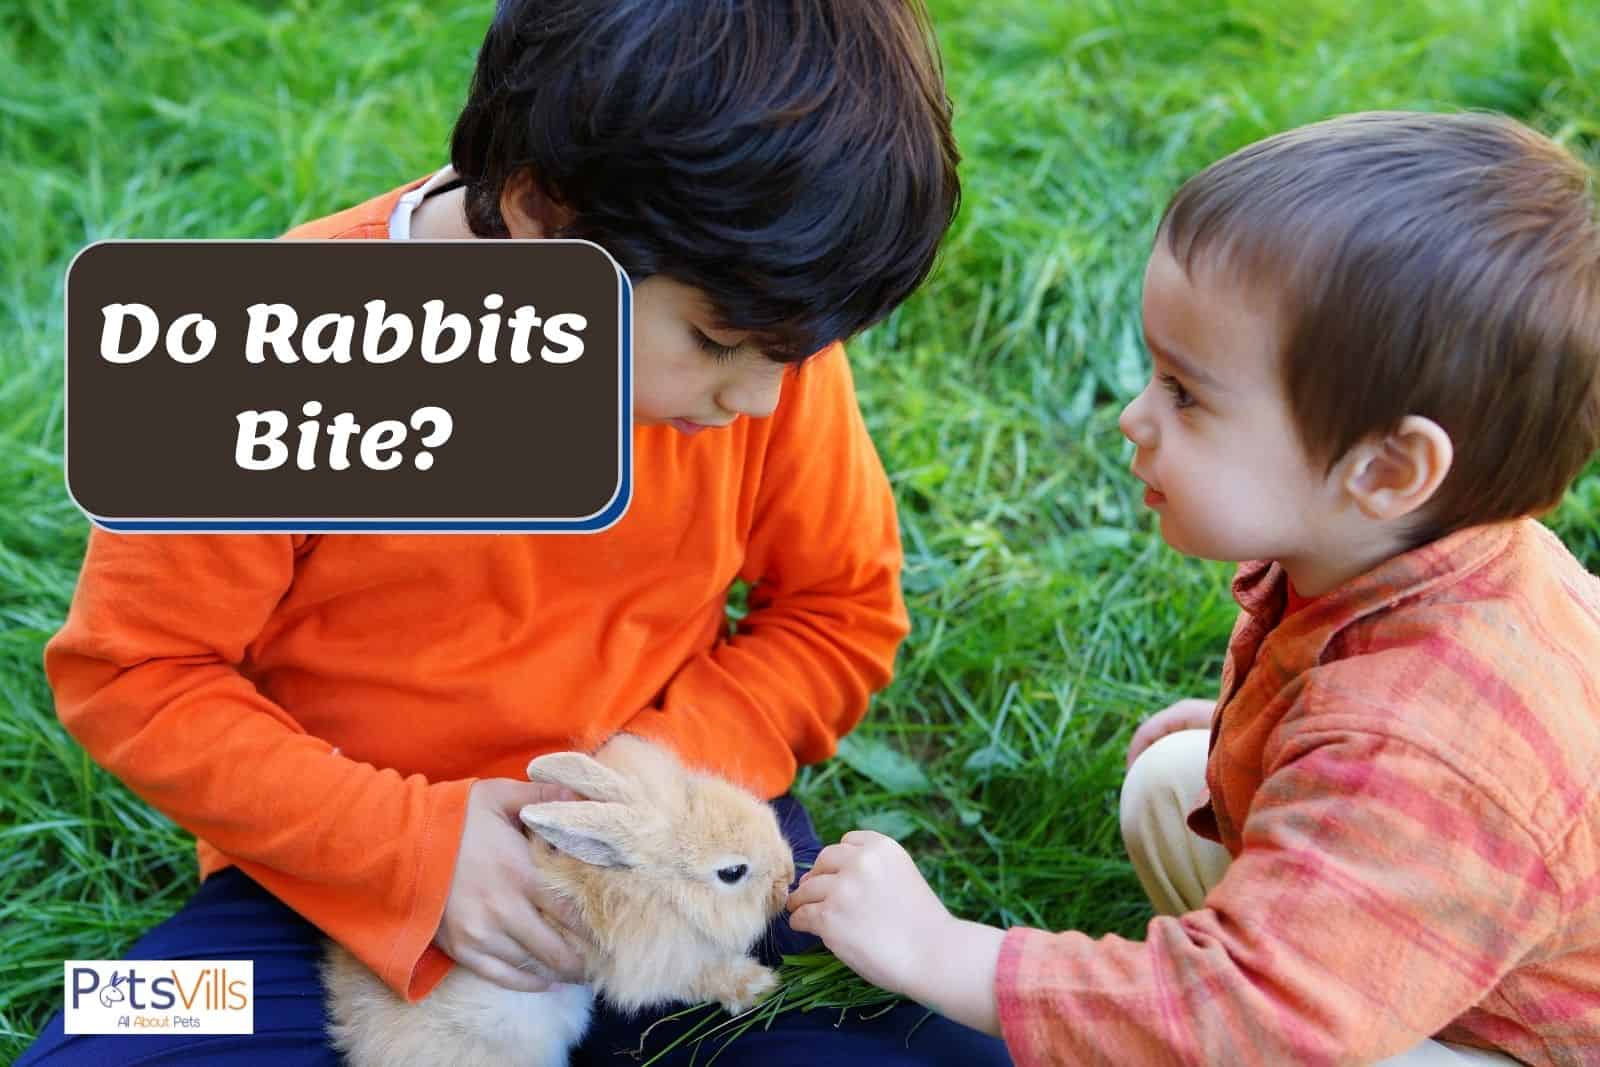 a rabbit trying to bit on kids hand, do rabbits bite